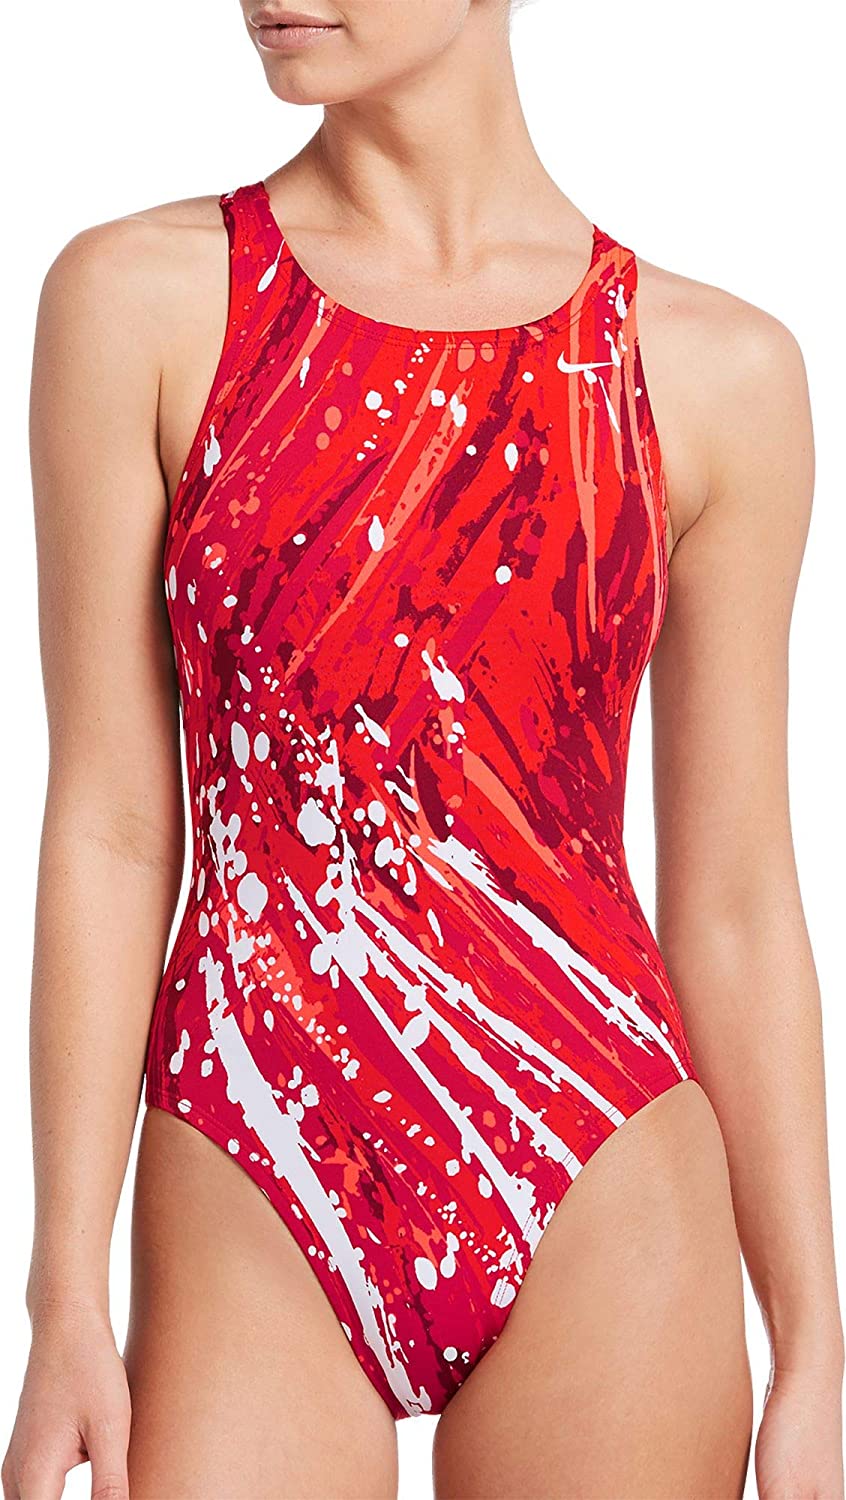 Nike Swim Women's Fast Back One Piece in University Red color from the front